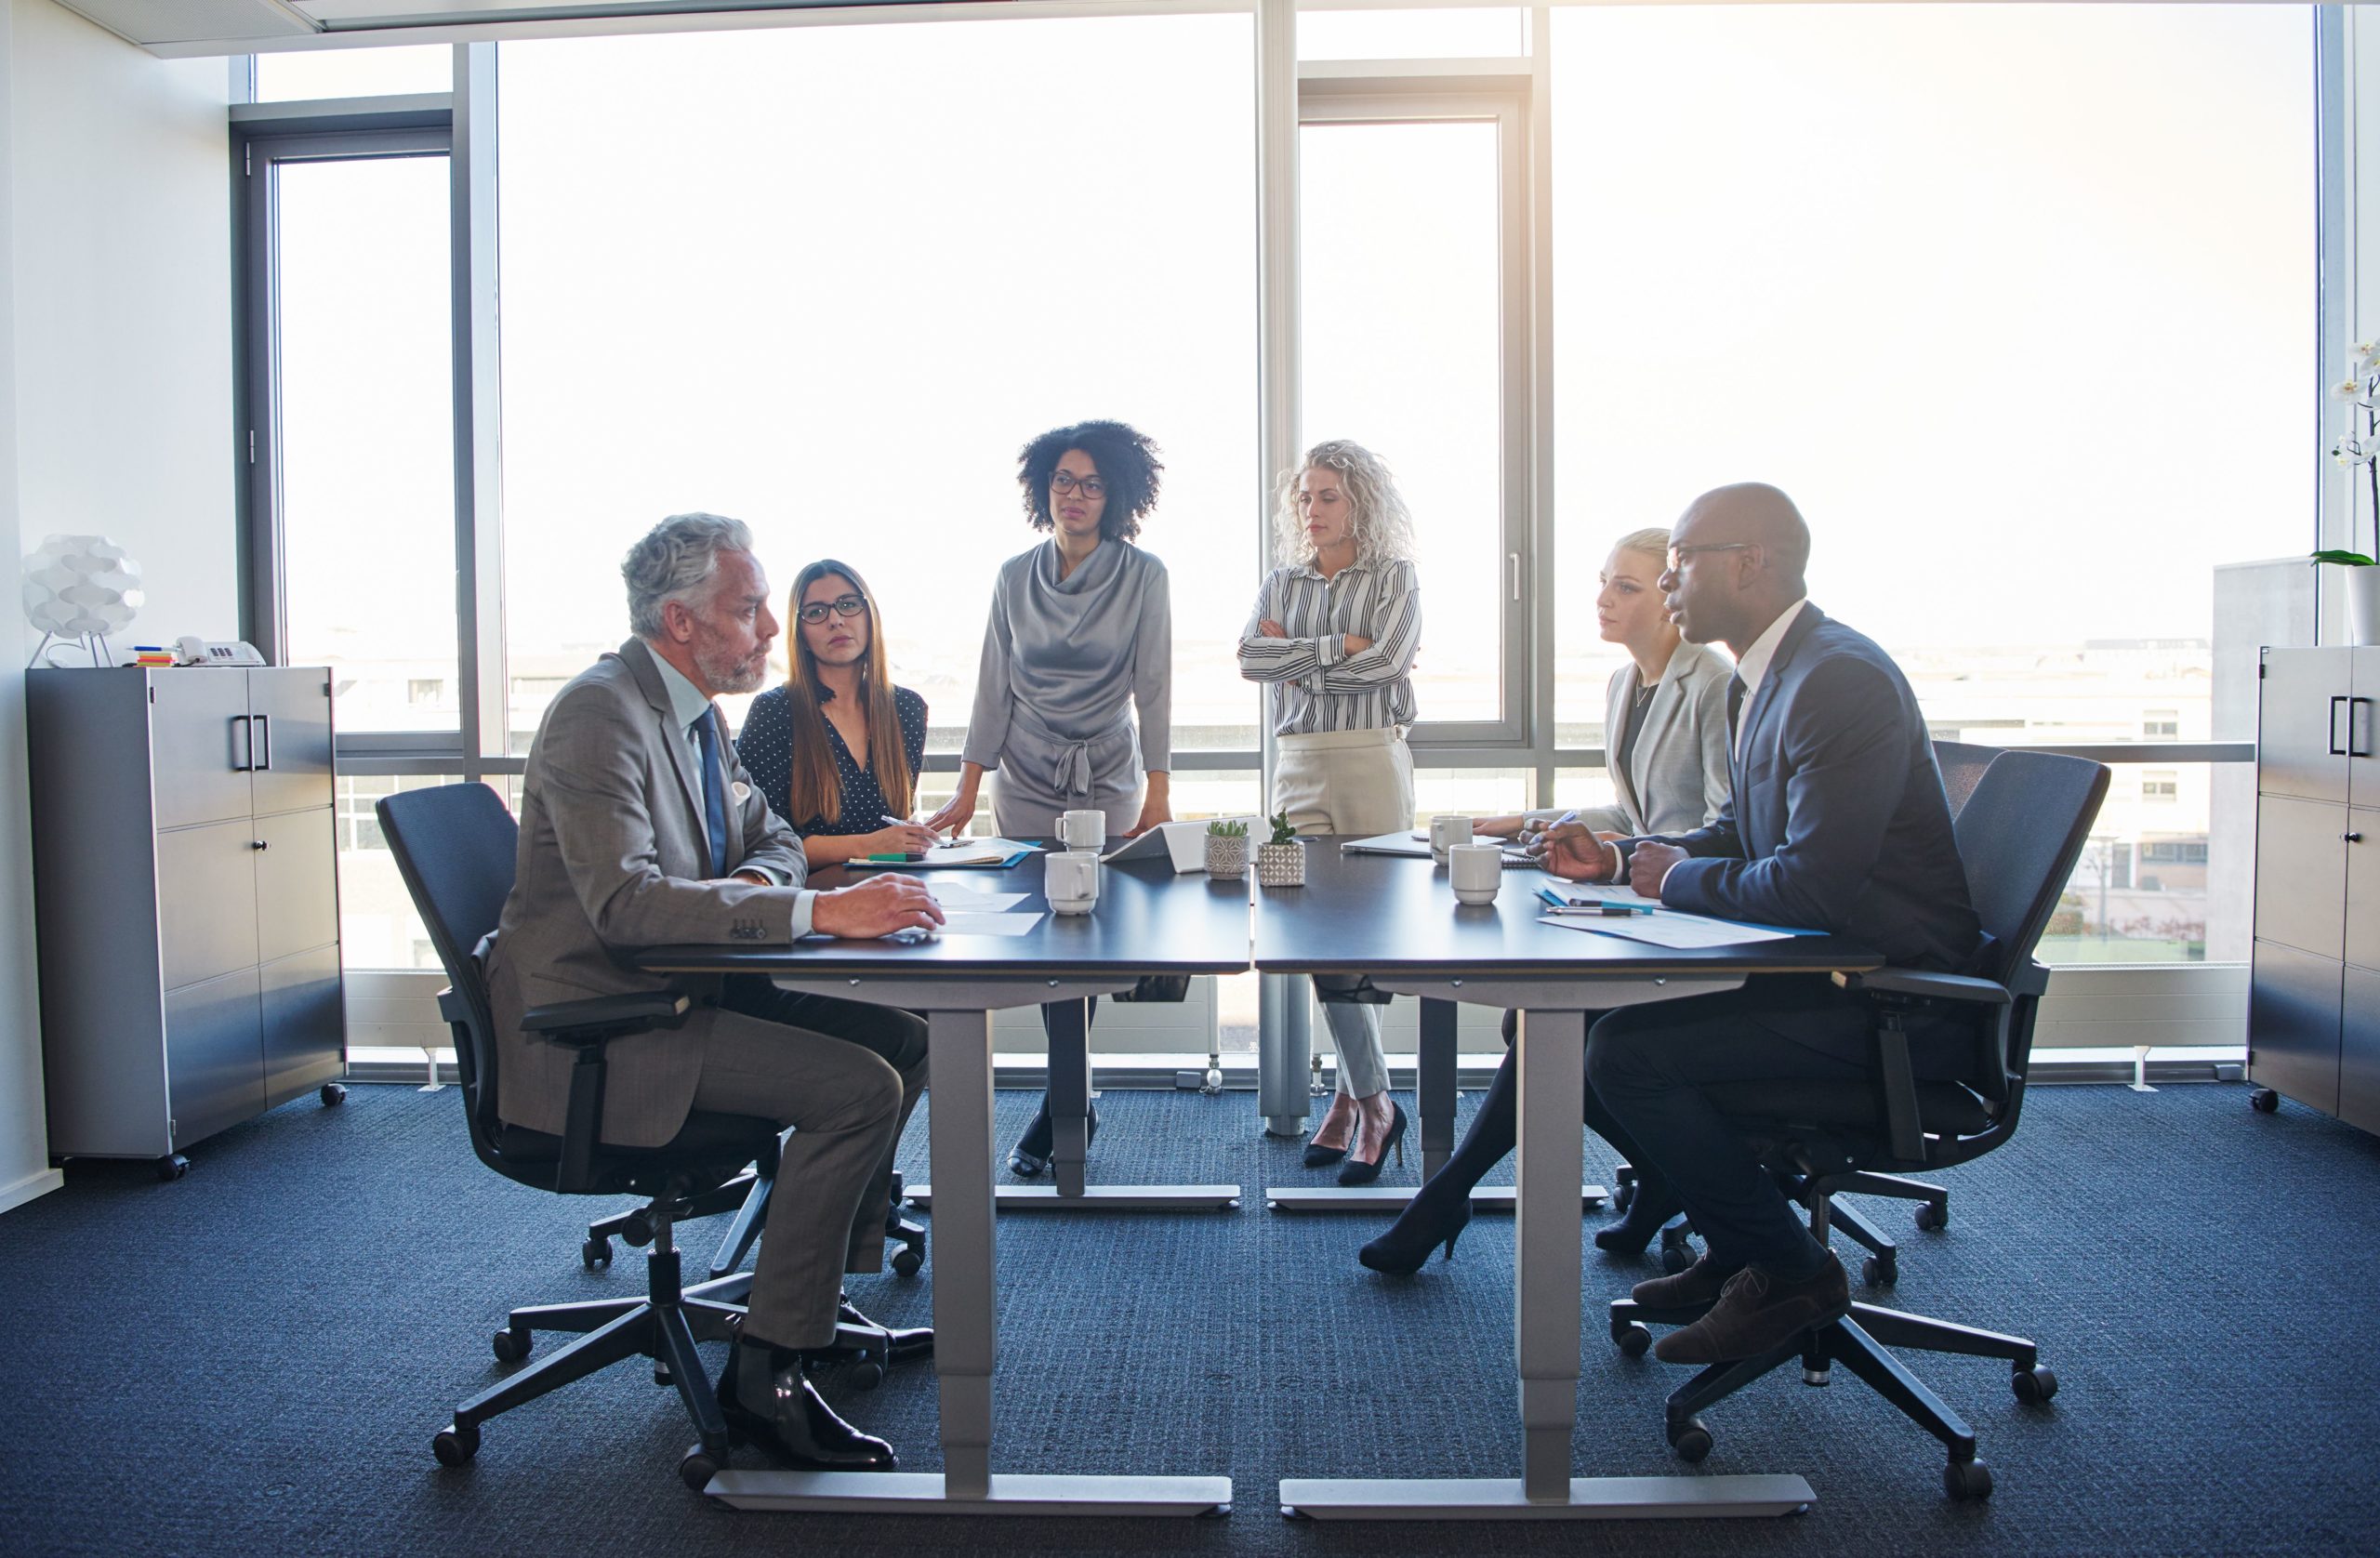 A recent survey sends a clear message: There is still work to be done, as women and minorities are significantly underrepresented in the boardroom. 